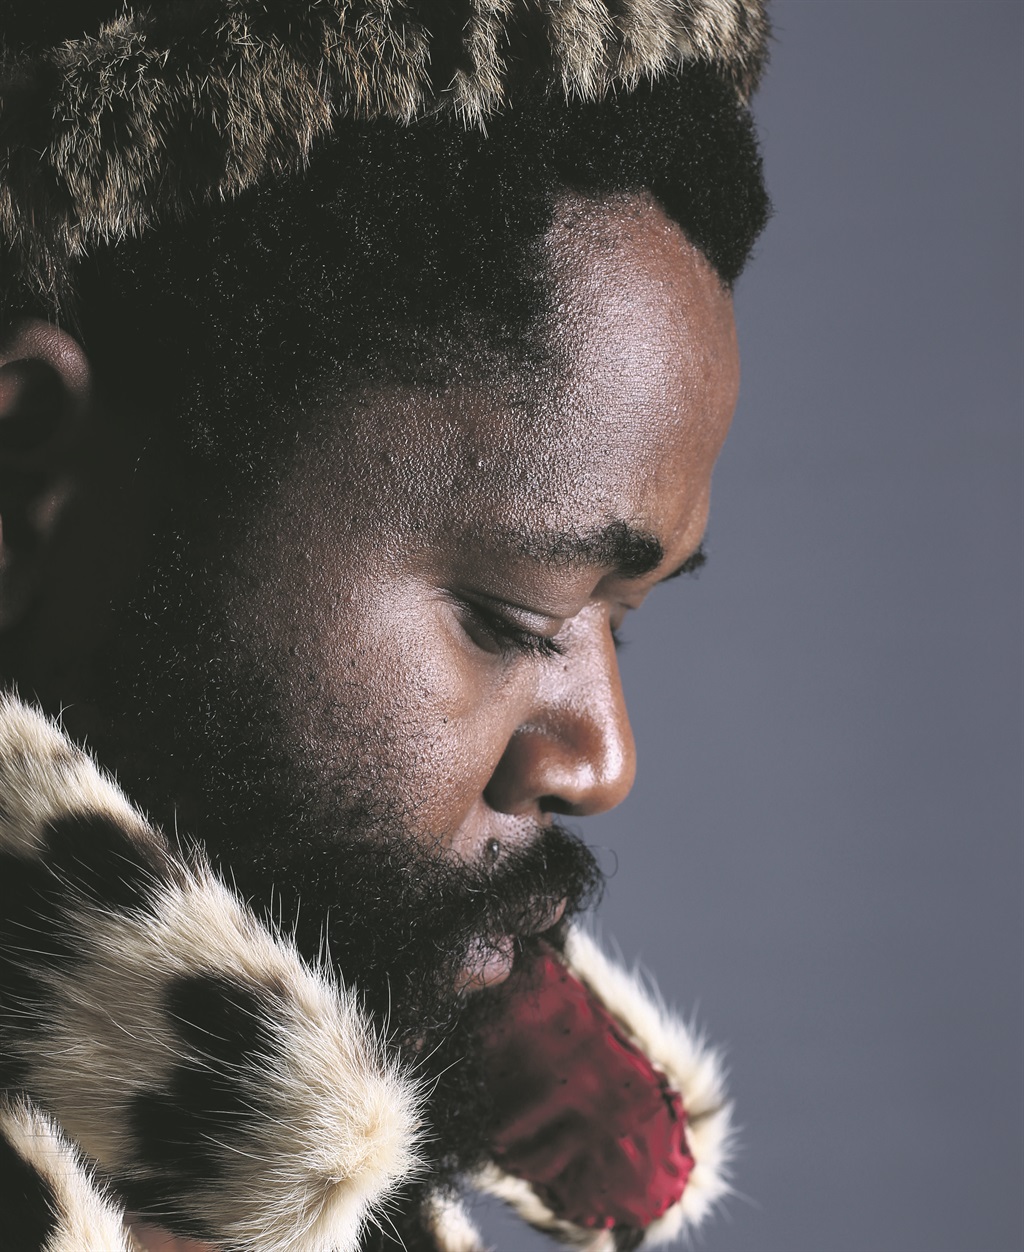 Sjava had been invited to perform at the Oscars with singers Kendrick Lamar and SZA, but then the US stars pulled out